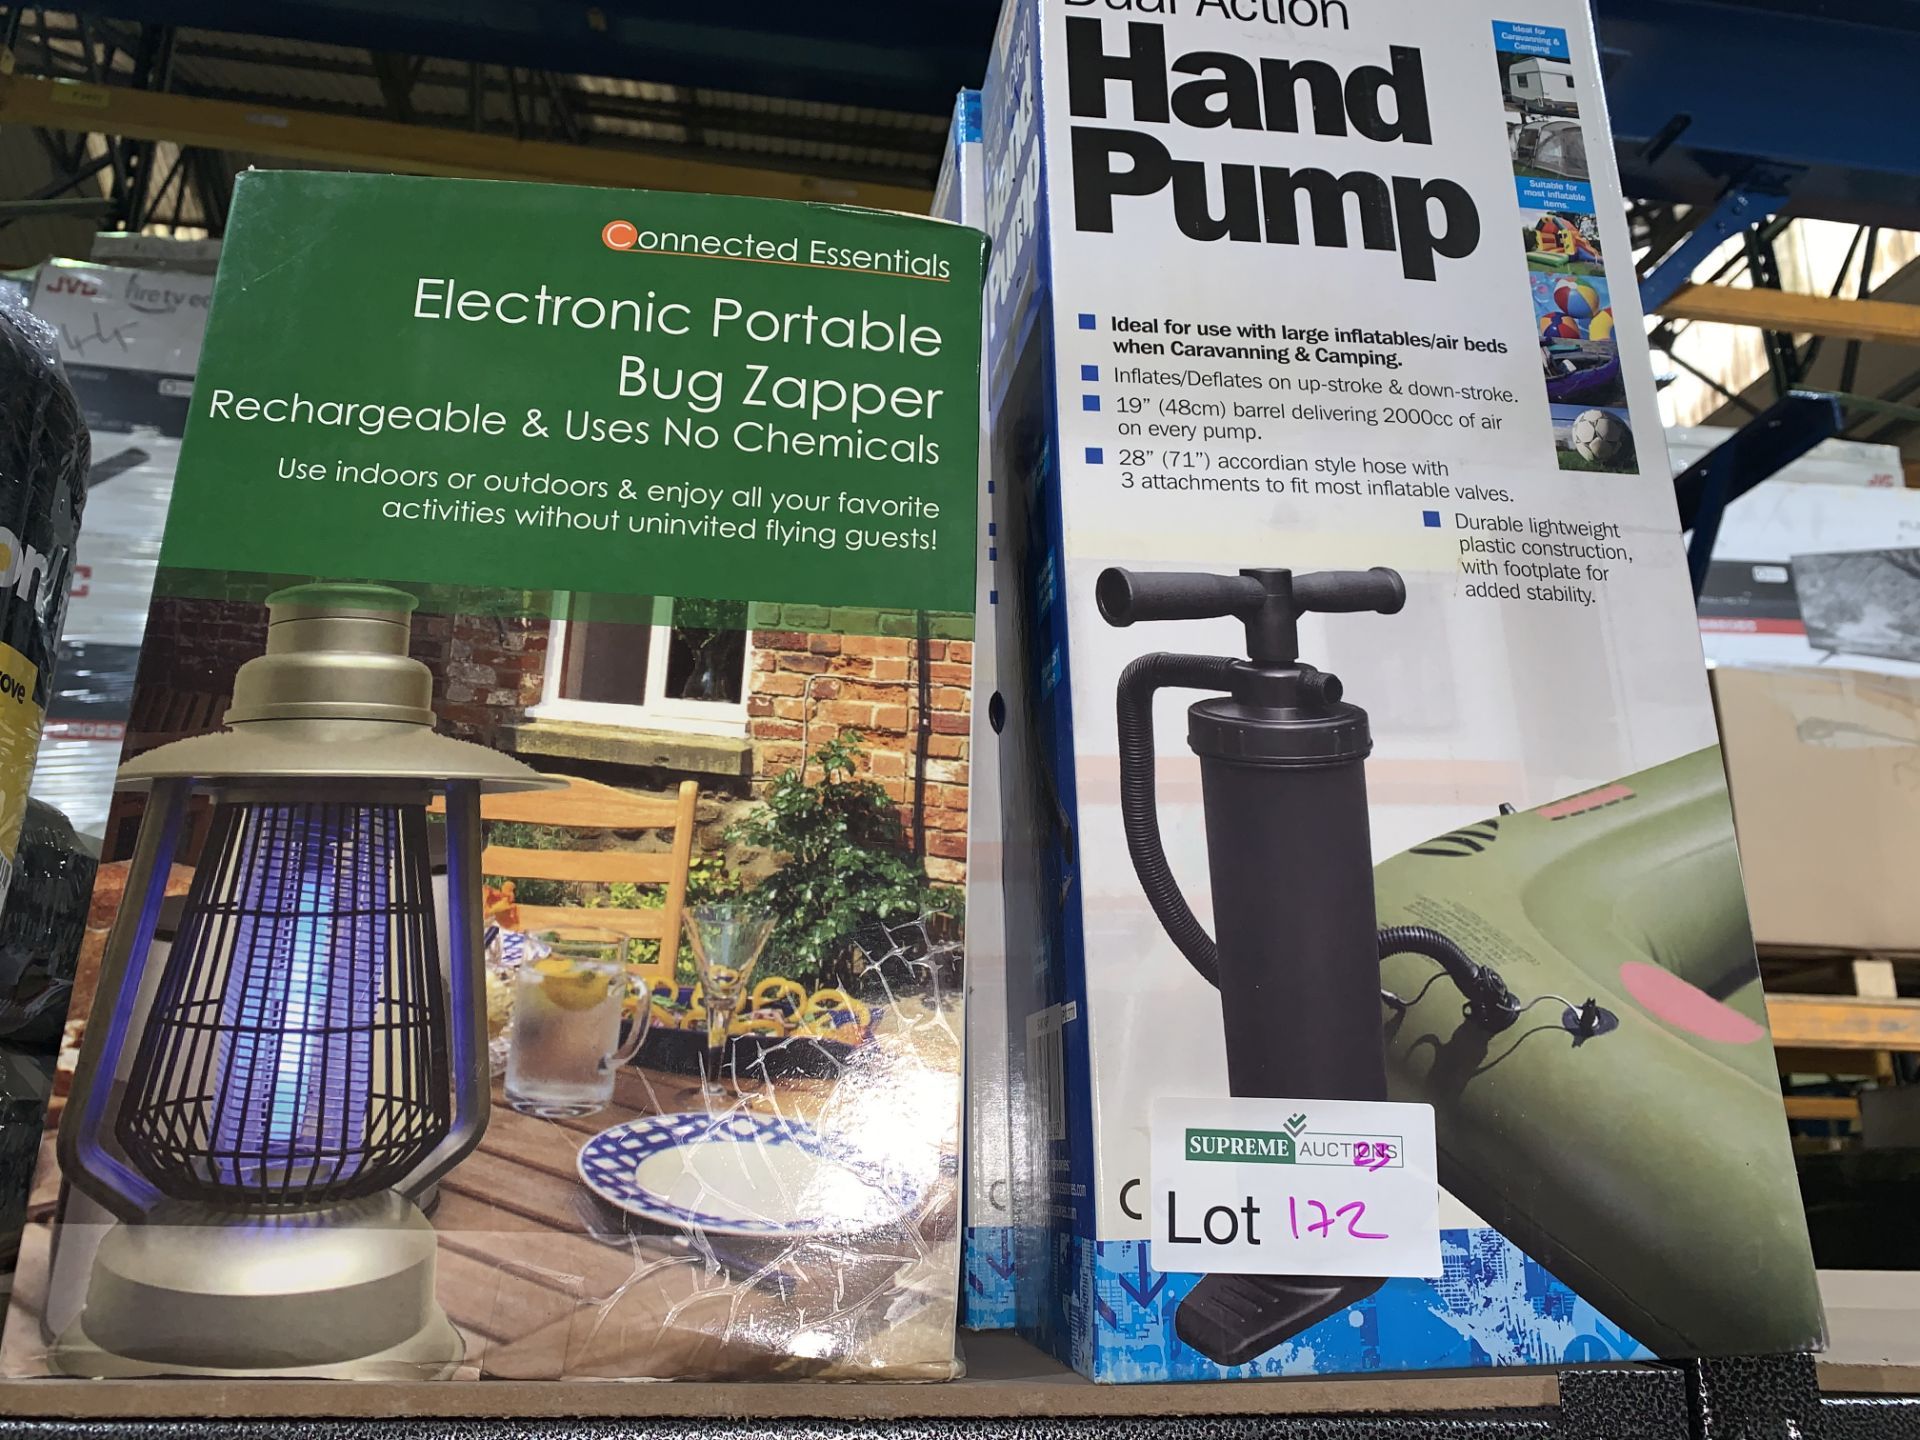 2 X DUAL ACTION HAND PUMPS AND 1 X ELECTRONICAL PORTABLE BUG ZAPPER (172/23)